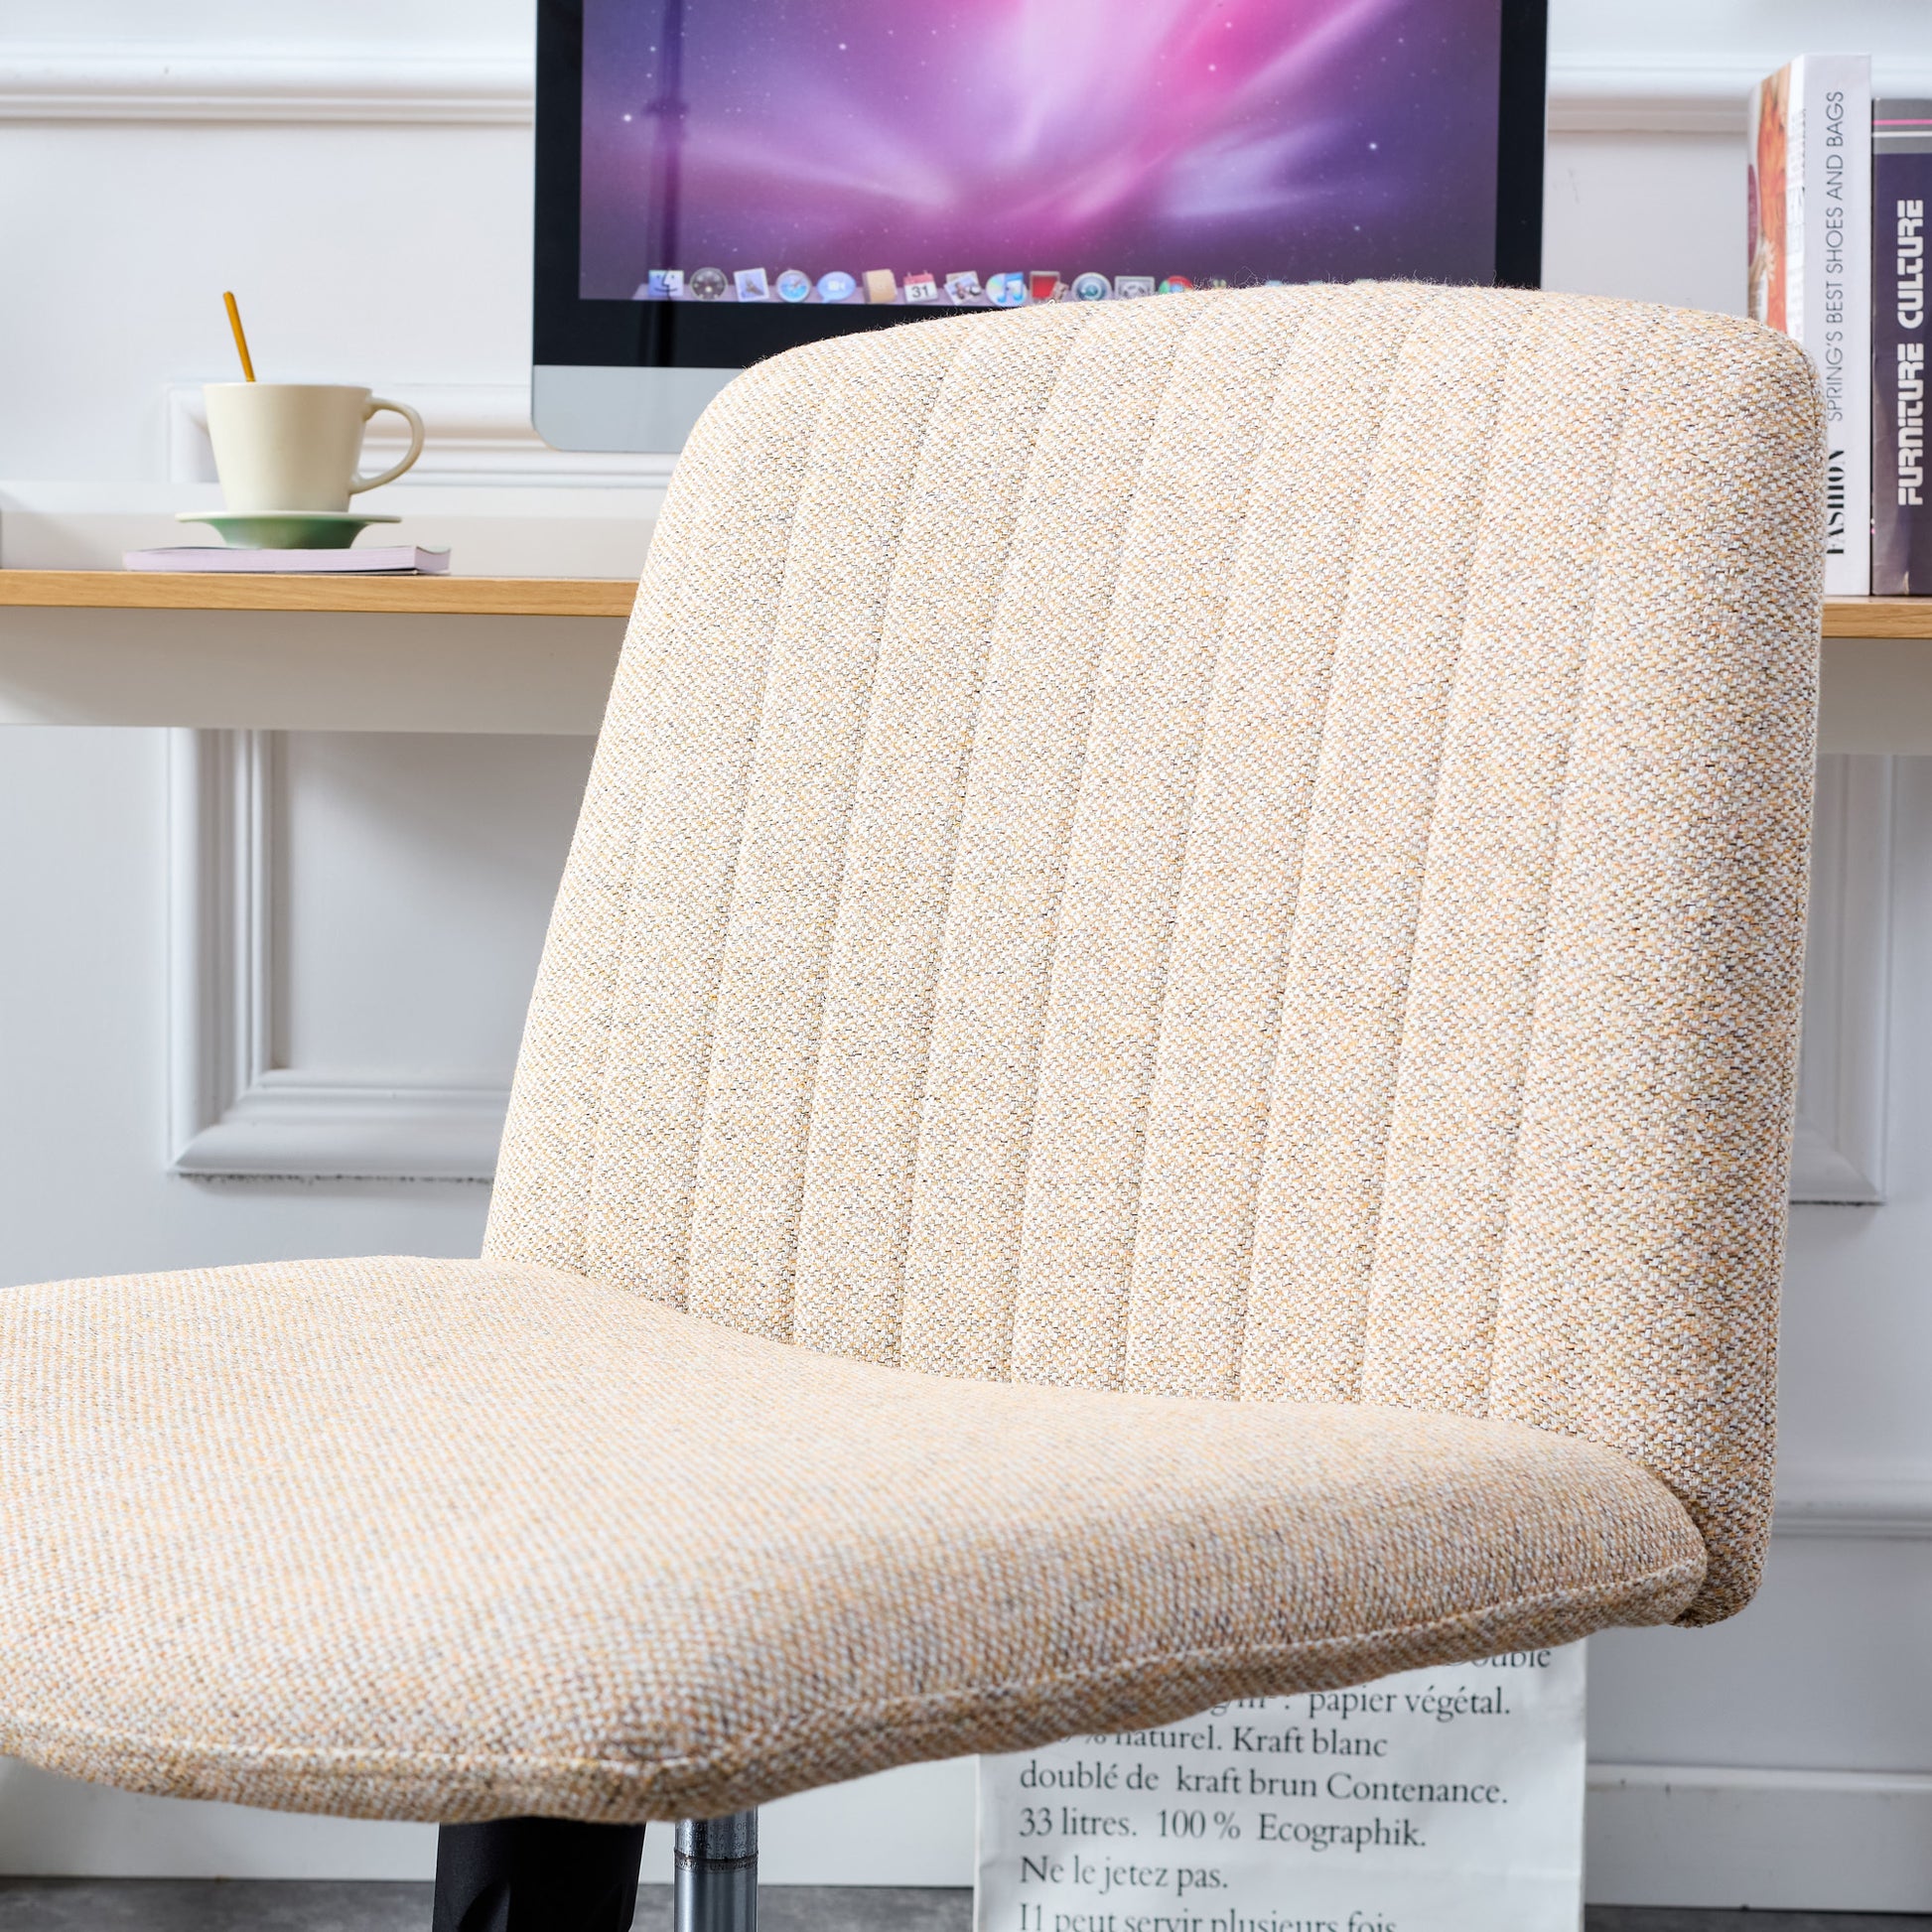 Fabric Material Home Computer Chair Office Chair beige-linen-fabric